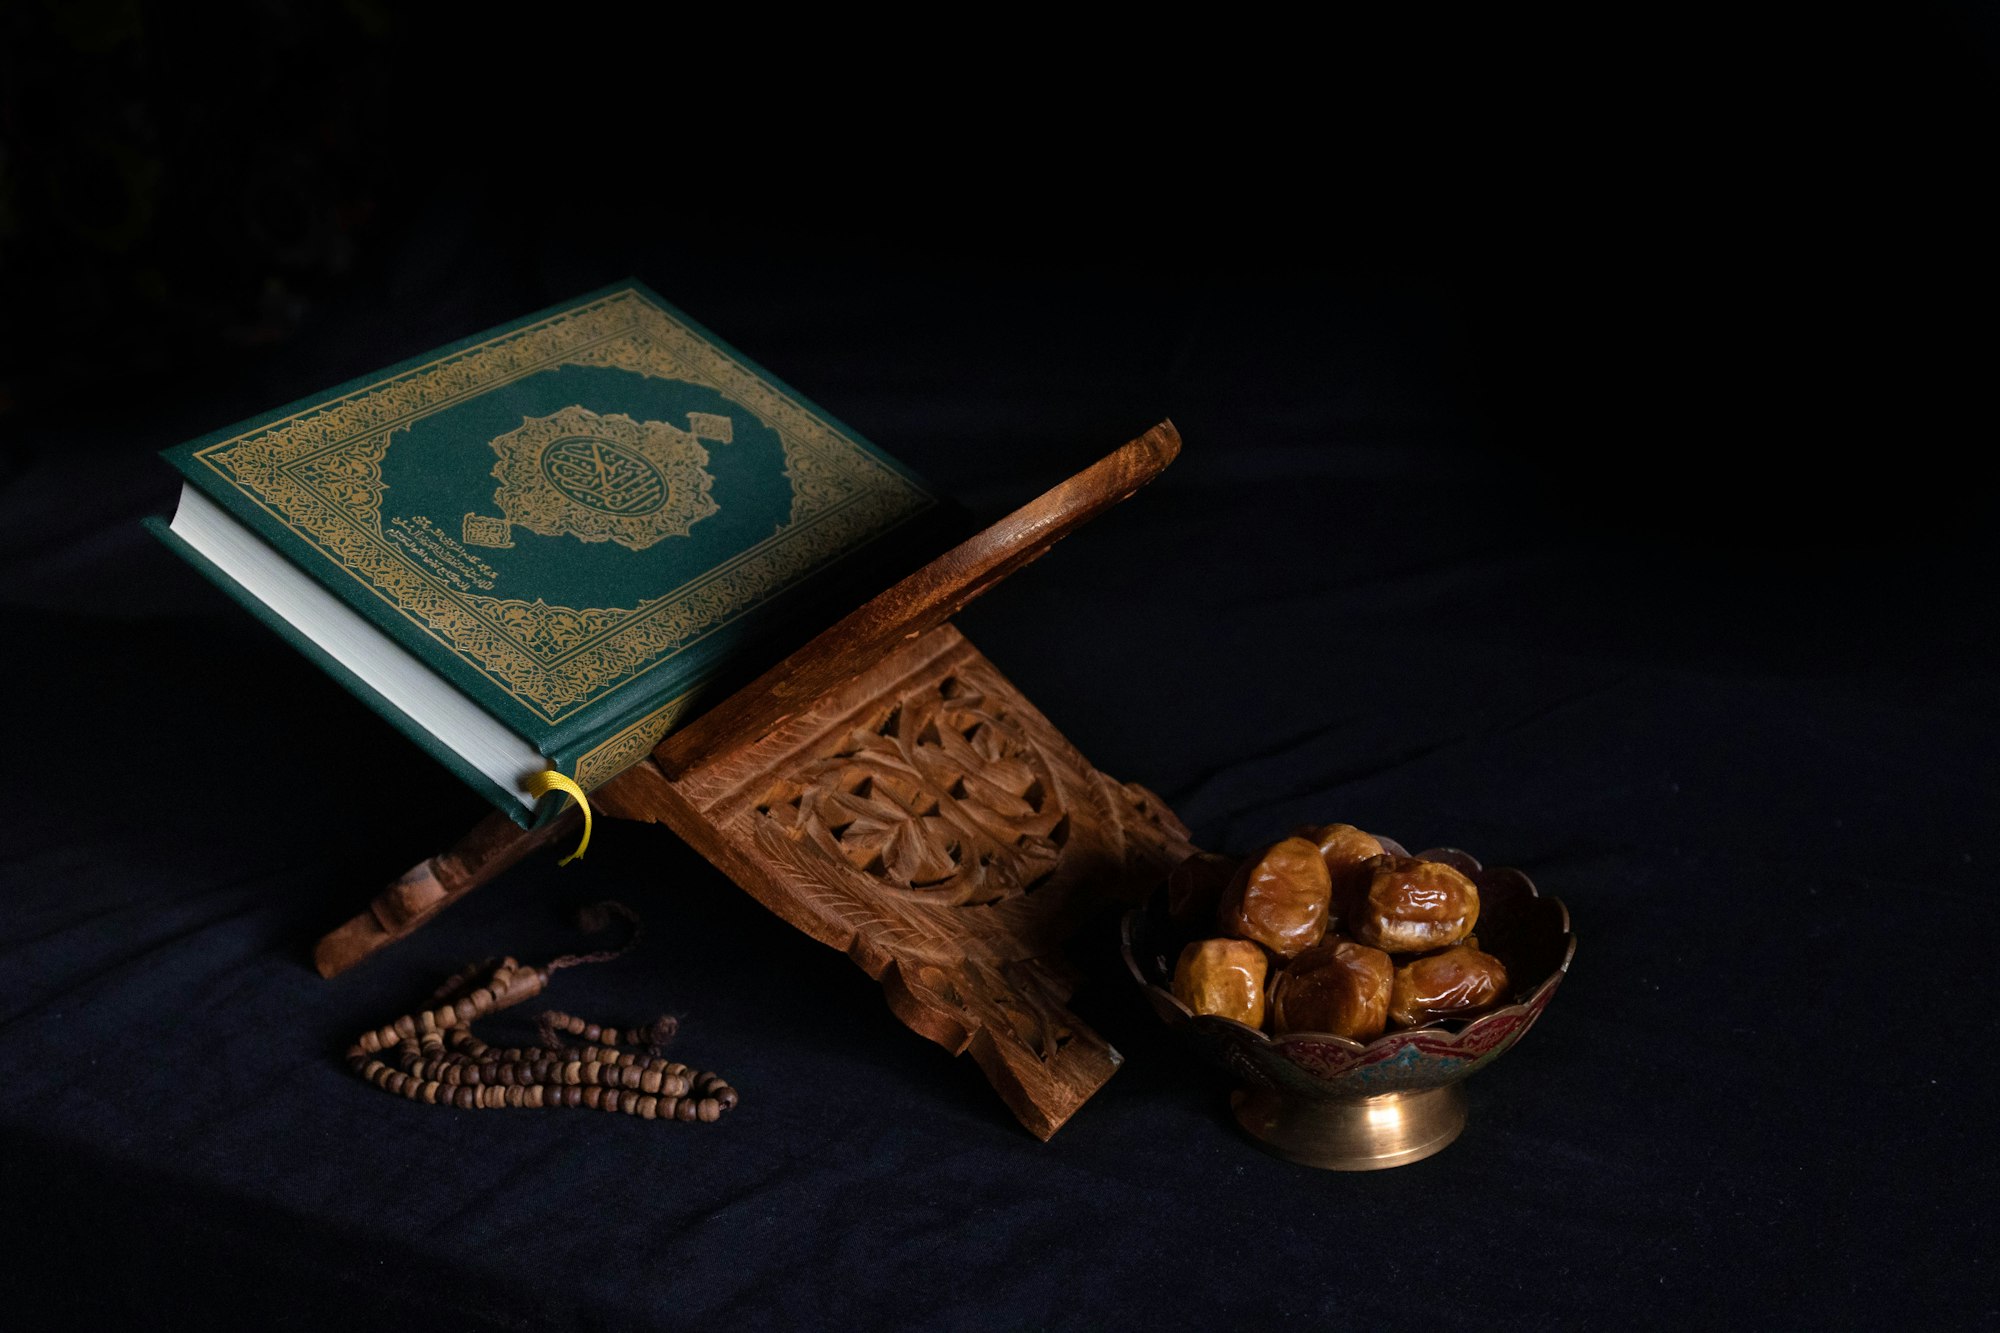 Quran The Holy Book and a Bowel of Dates, Dark Background